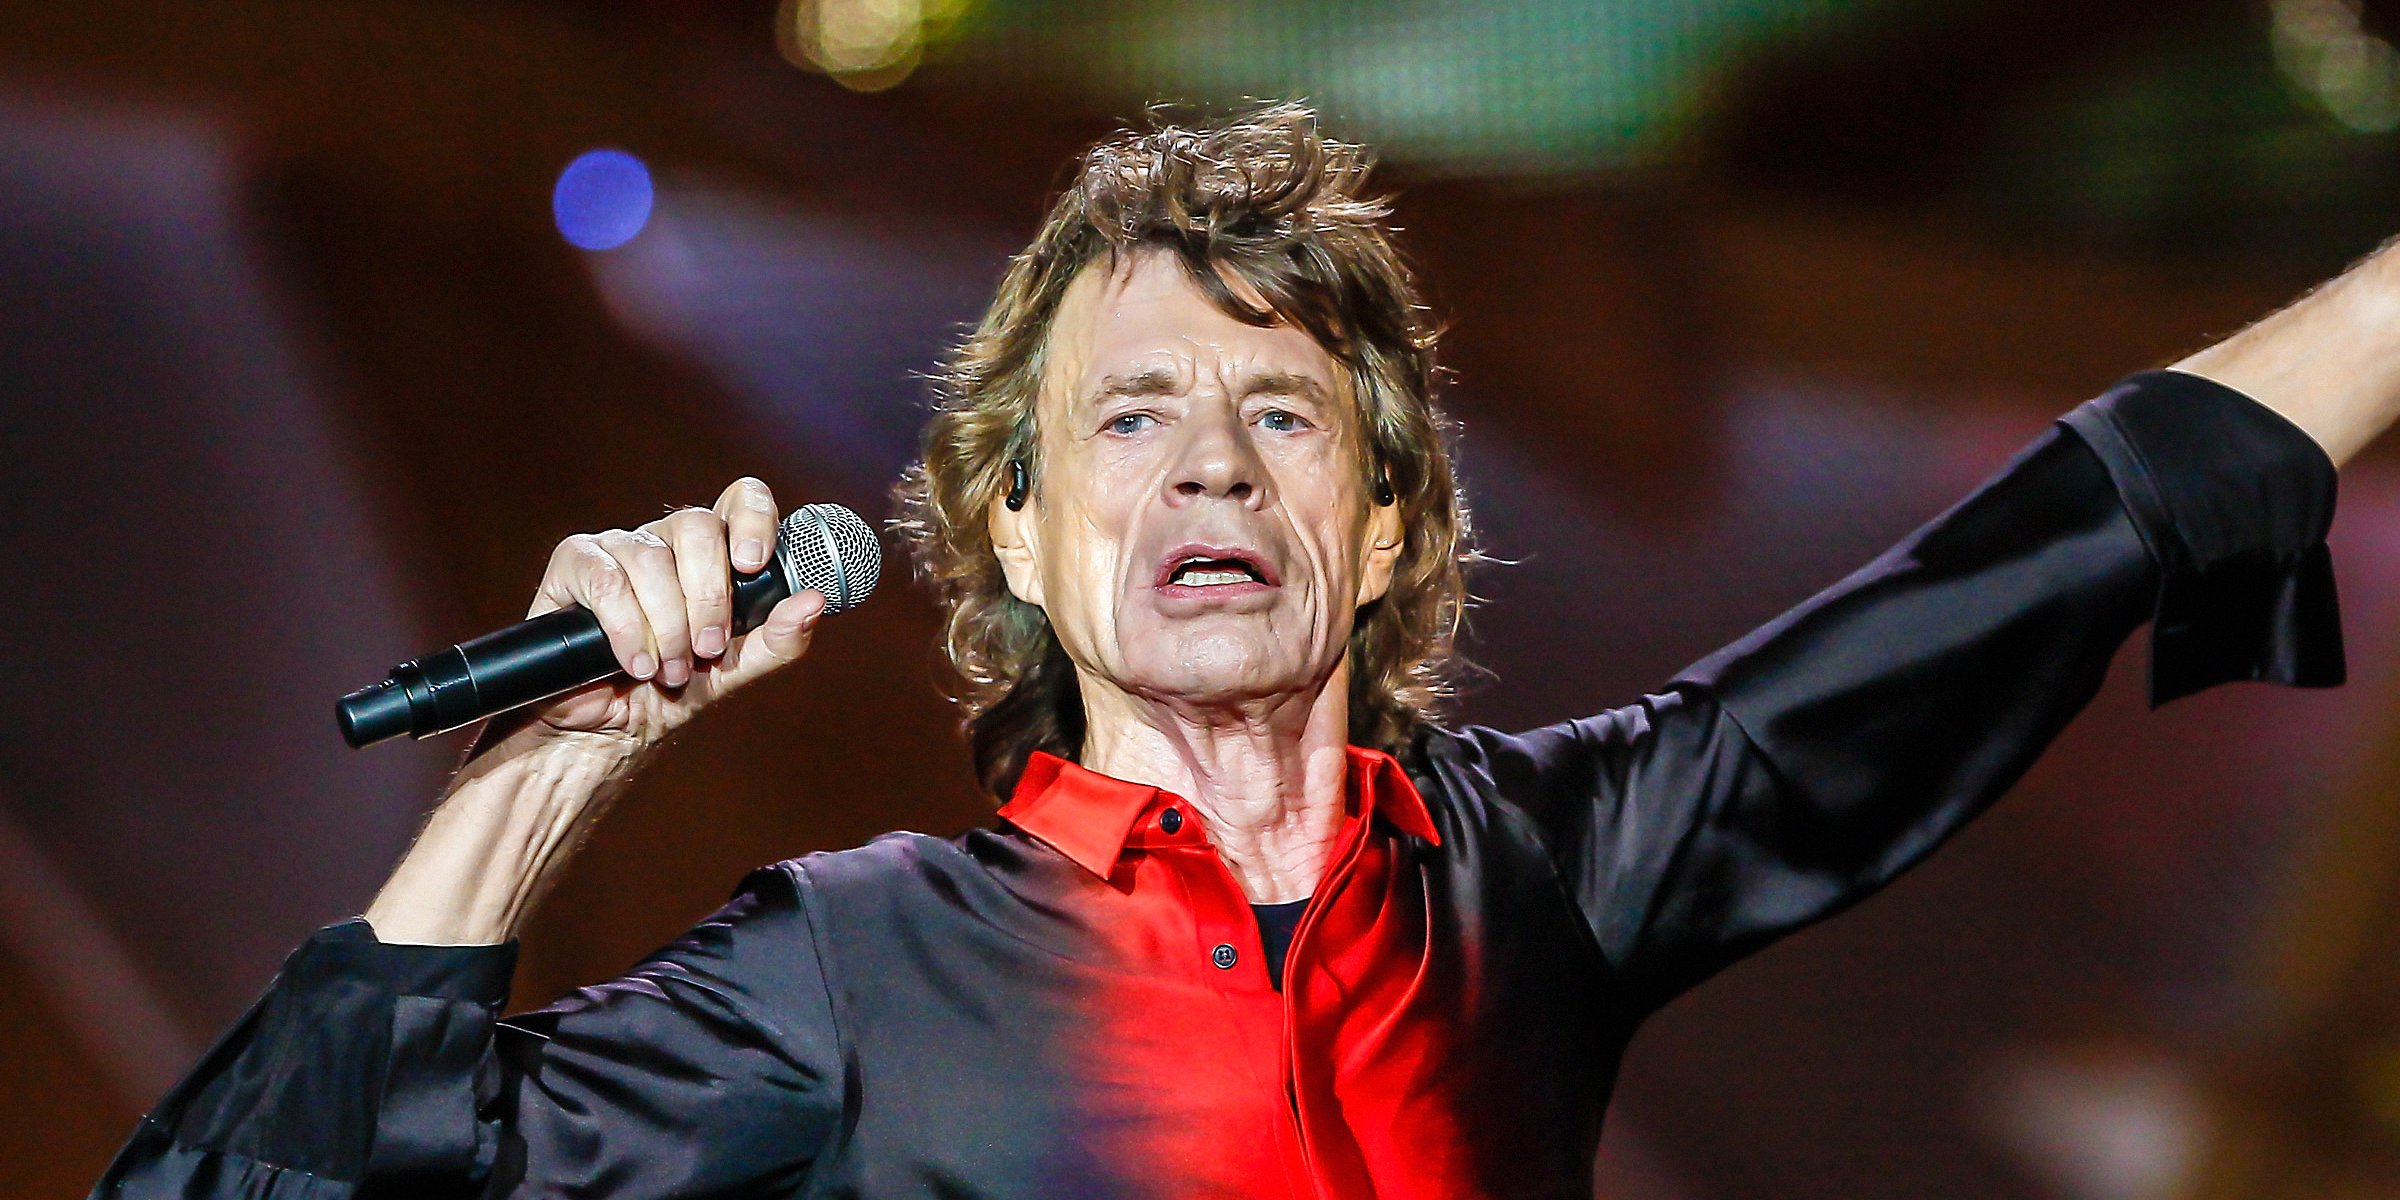 Mick Jagger┃Source: Getty Images